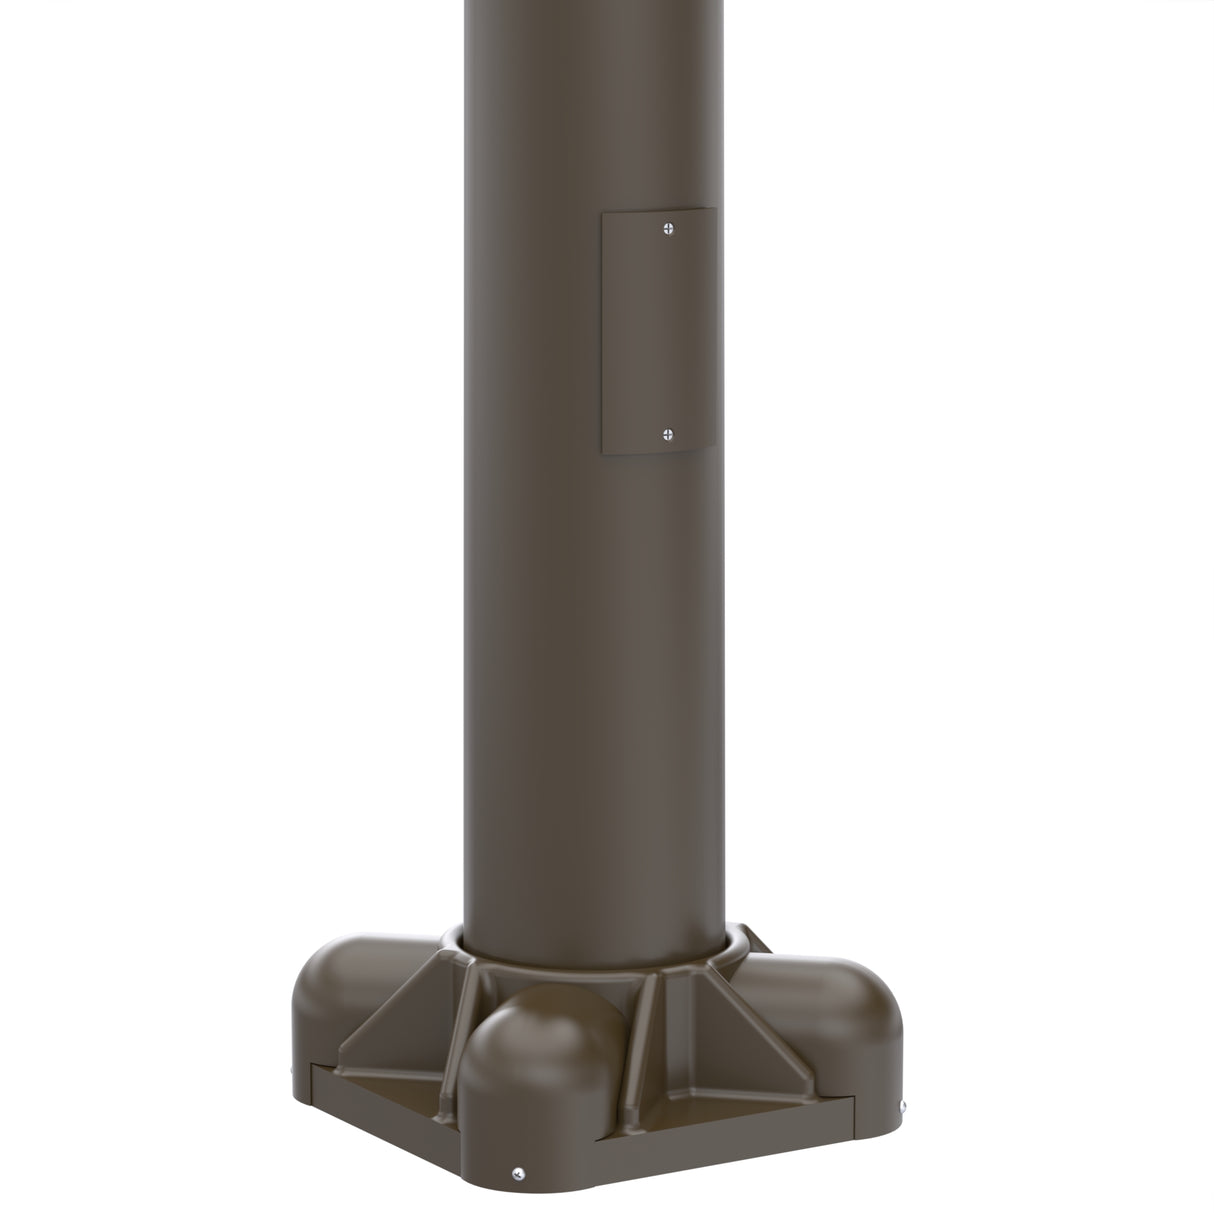 23' Tall x 6.0" Base OD x 4.0" Top OD x 0.188" Thick, Round Tapered Aluminum, Anchor Base Light Pole